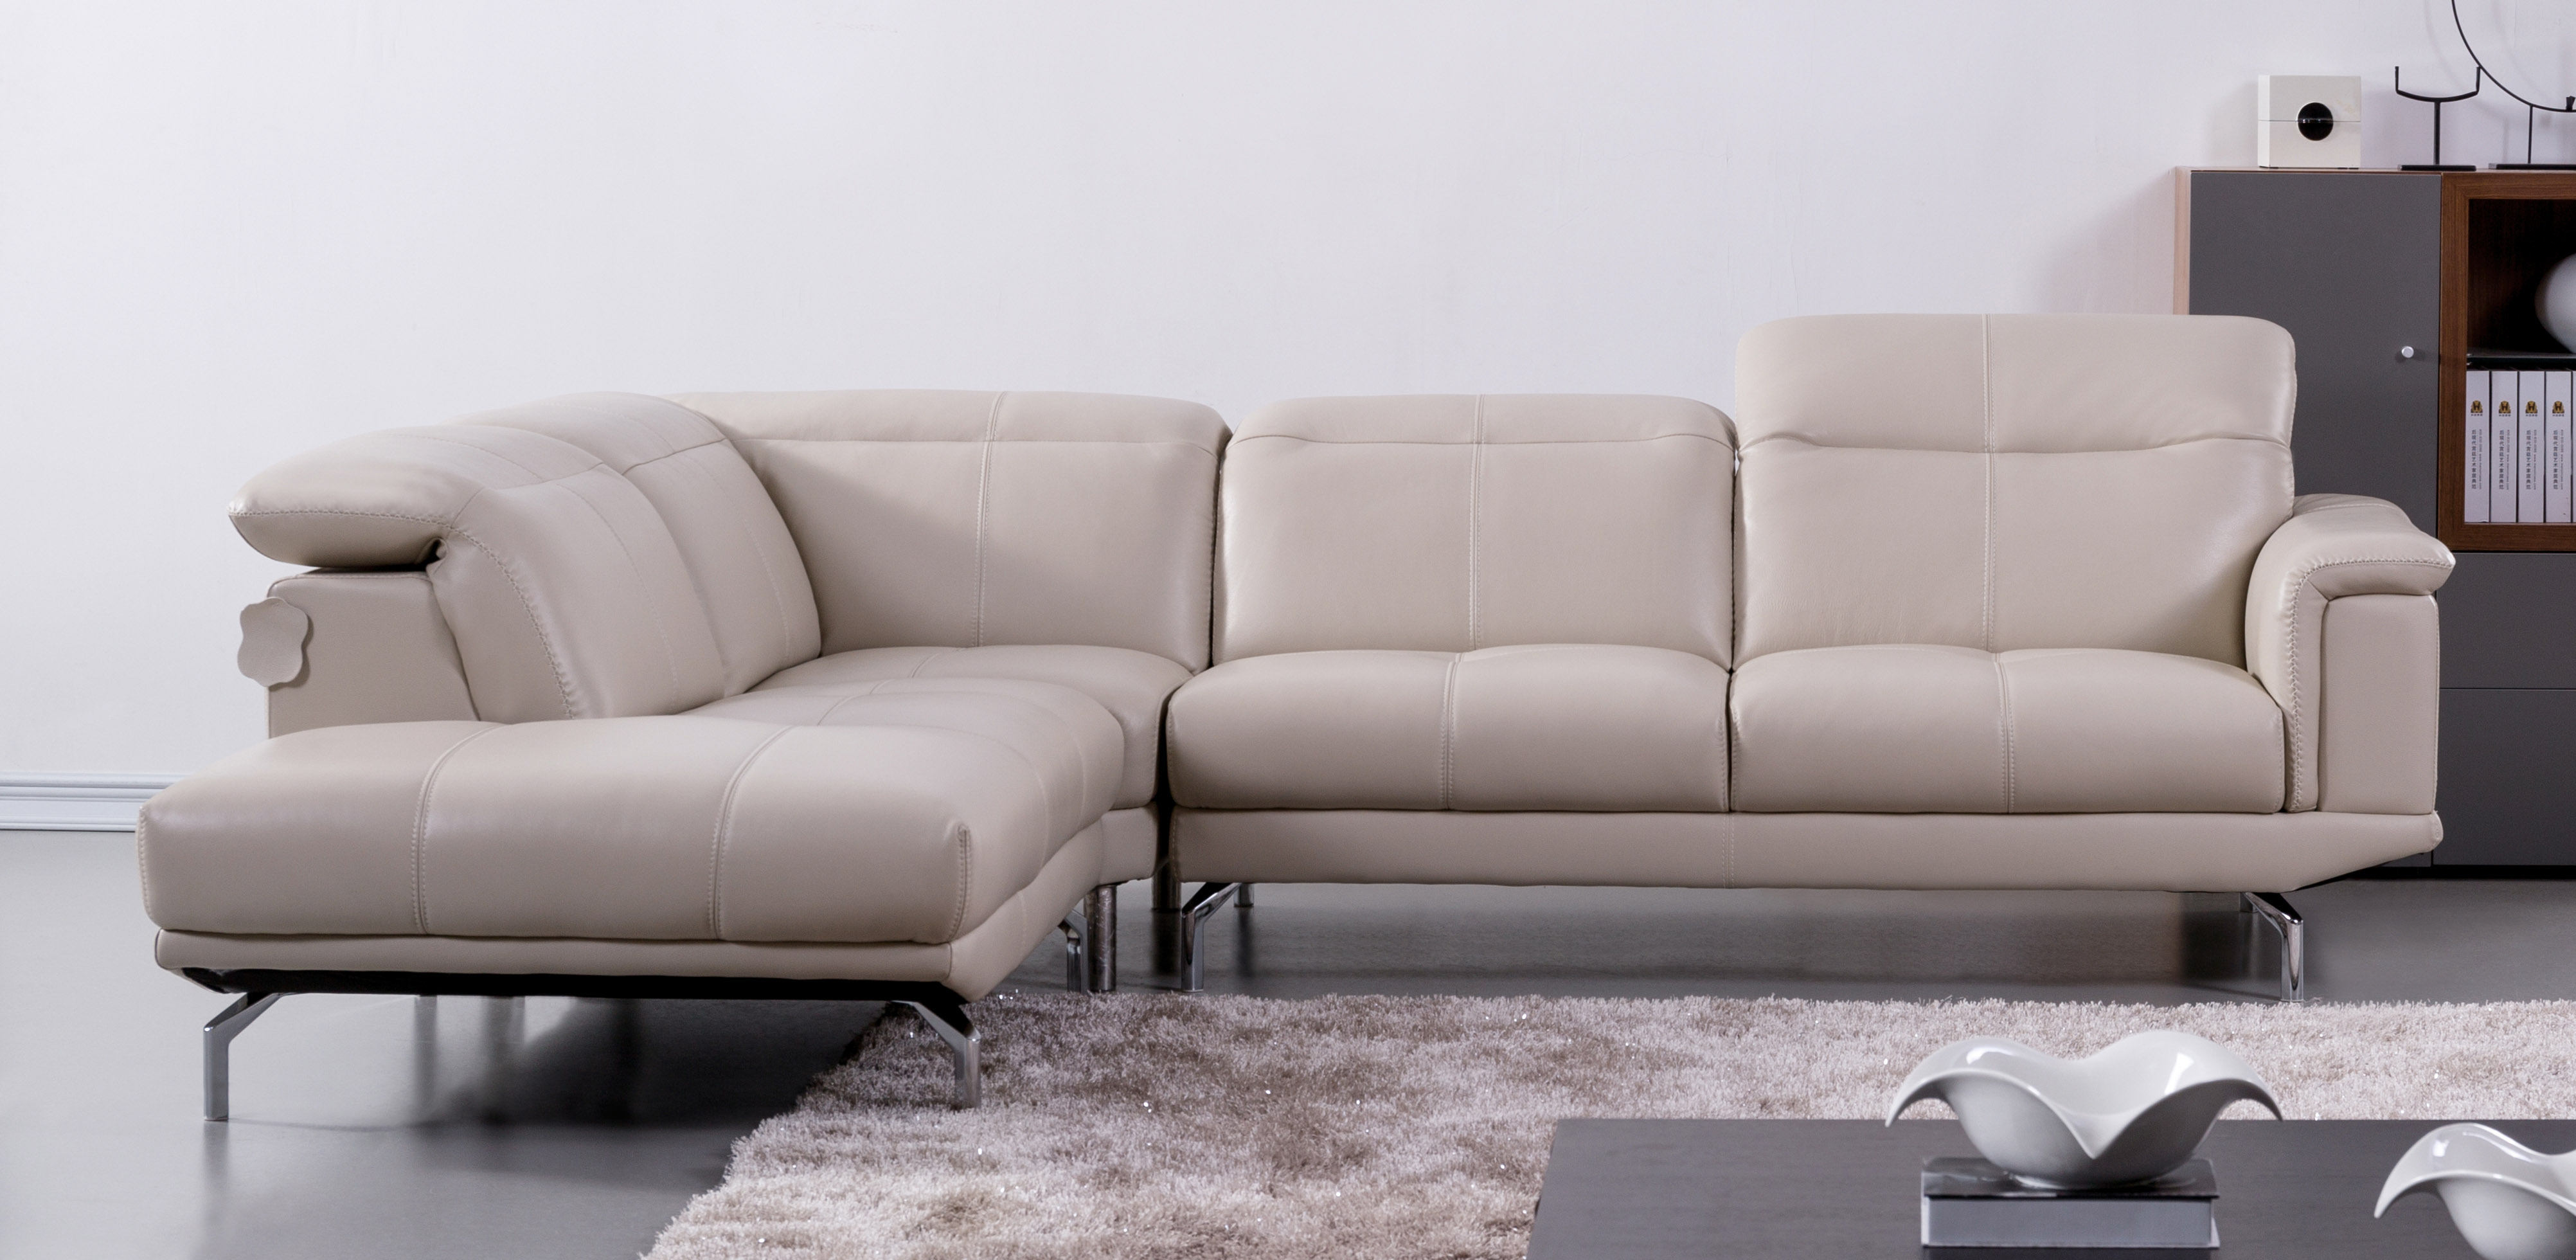 best value leather sectional sofa